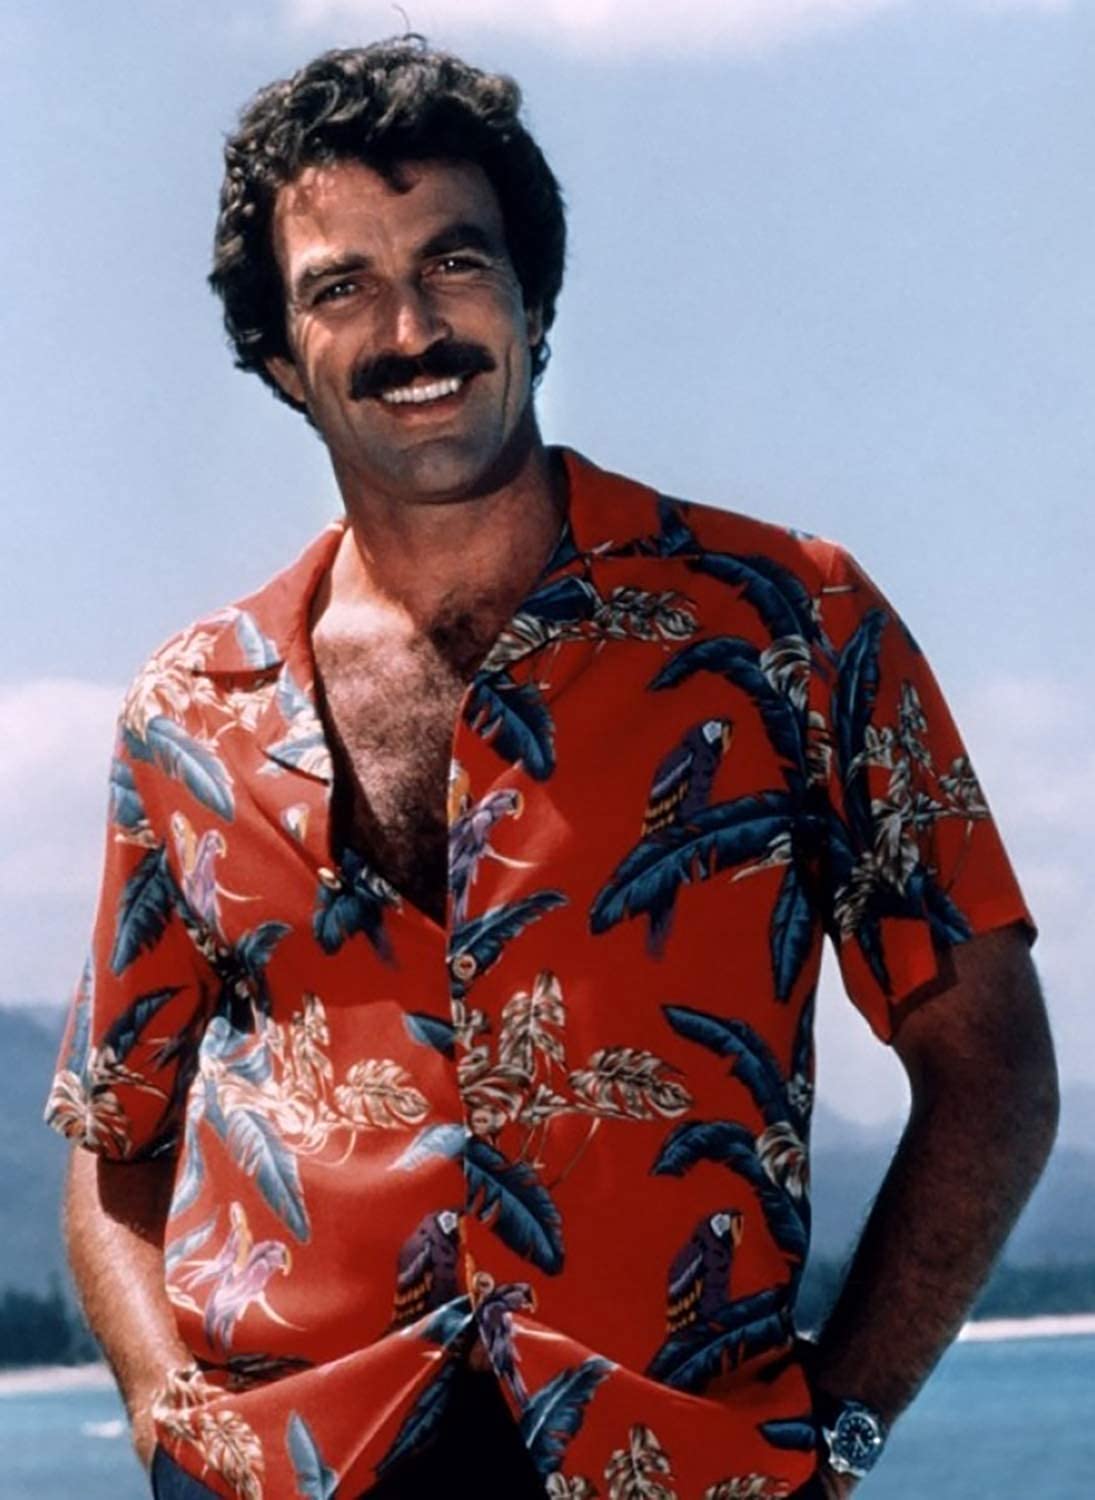 Shirt | Tom Selleck Magnum | Made in Hawaii | Different Designs